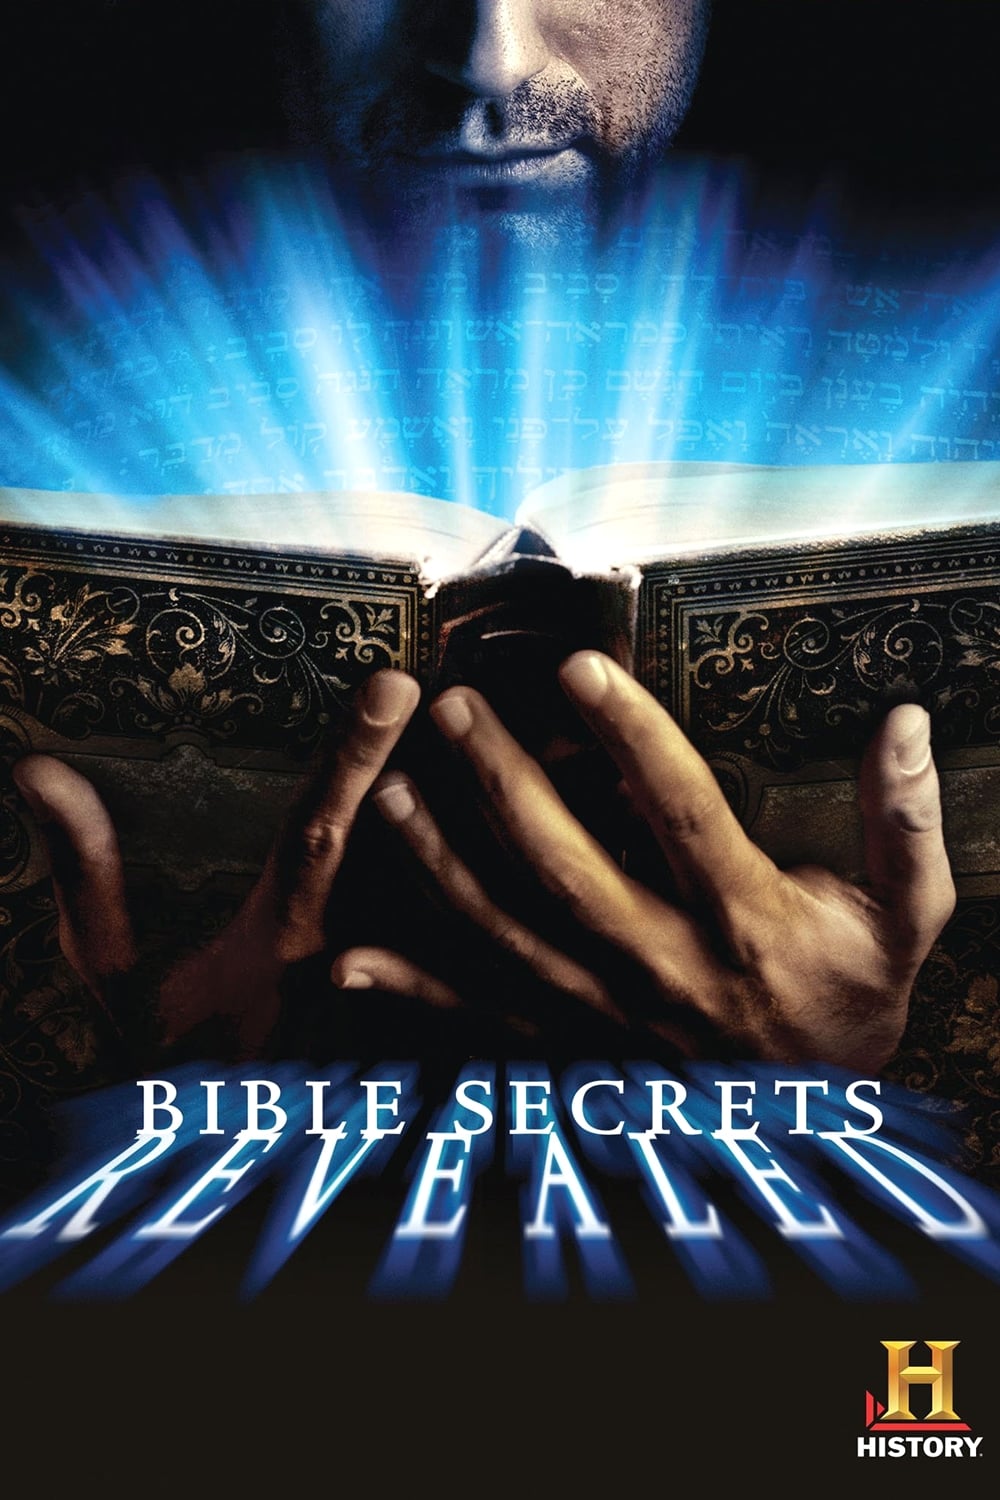 Bible Secrets Revealed TV Shows About Christianity